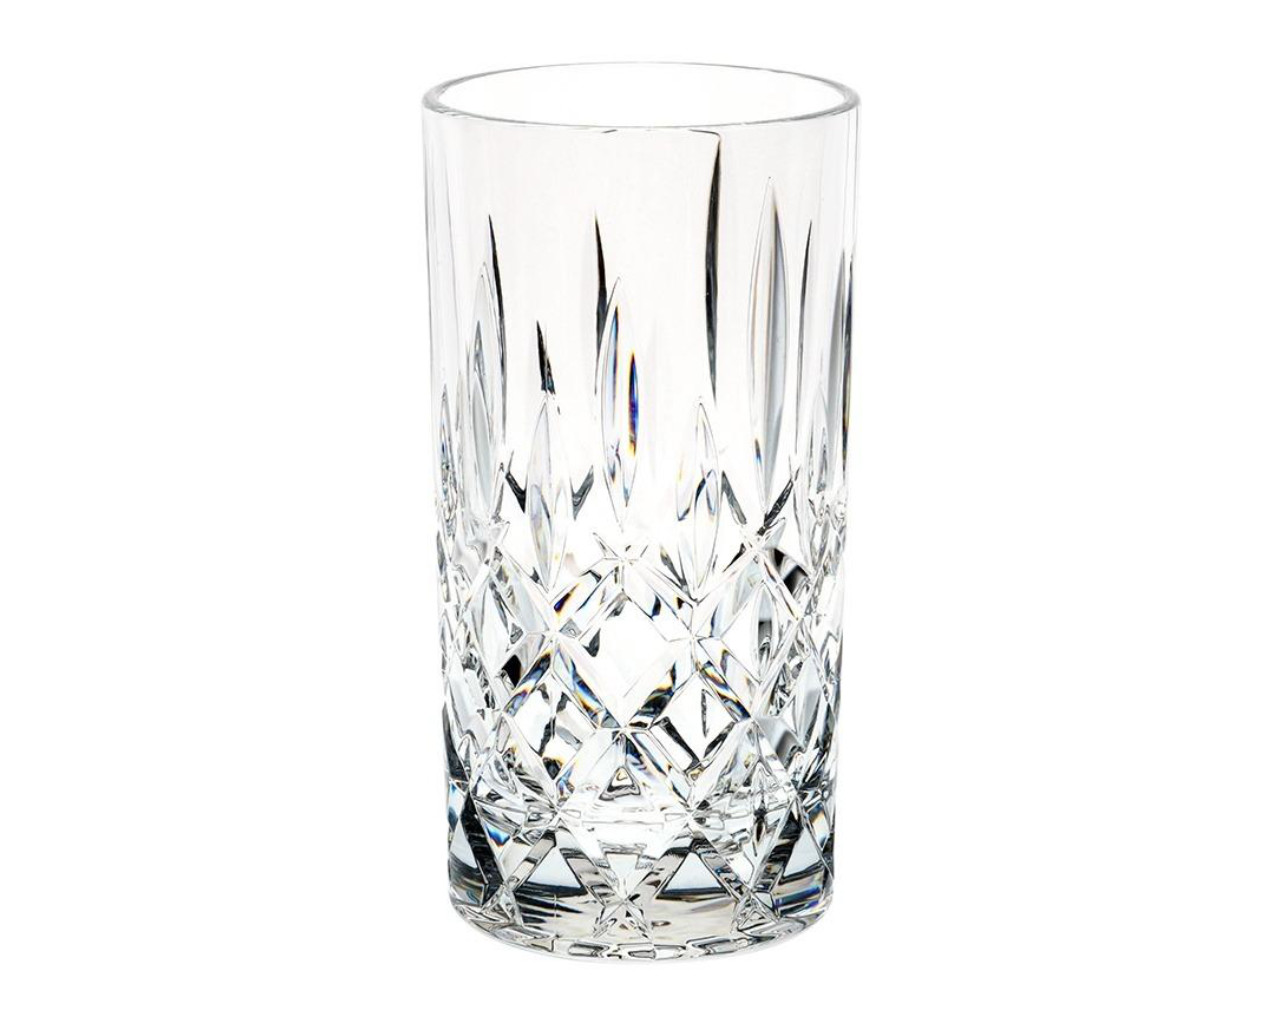 D-Still Unbreakable Polycarbonate Diamond Cut Highball Glass 415ml - 4 Pack, , hi-res image number null